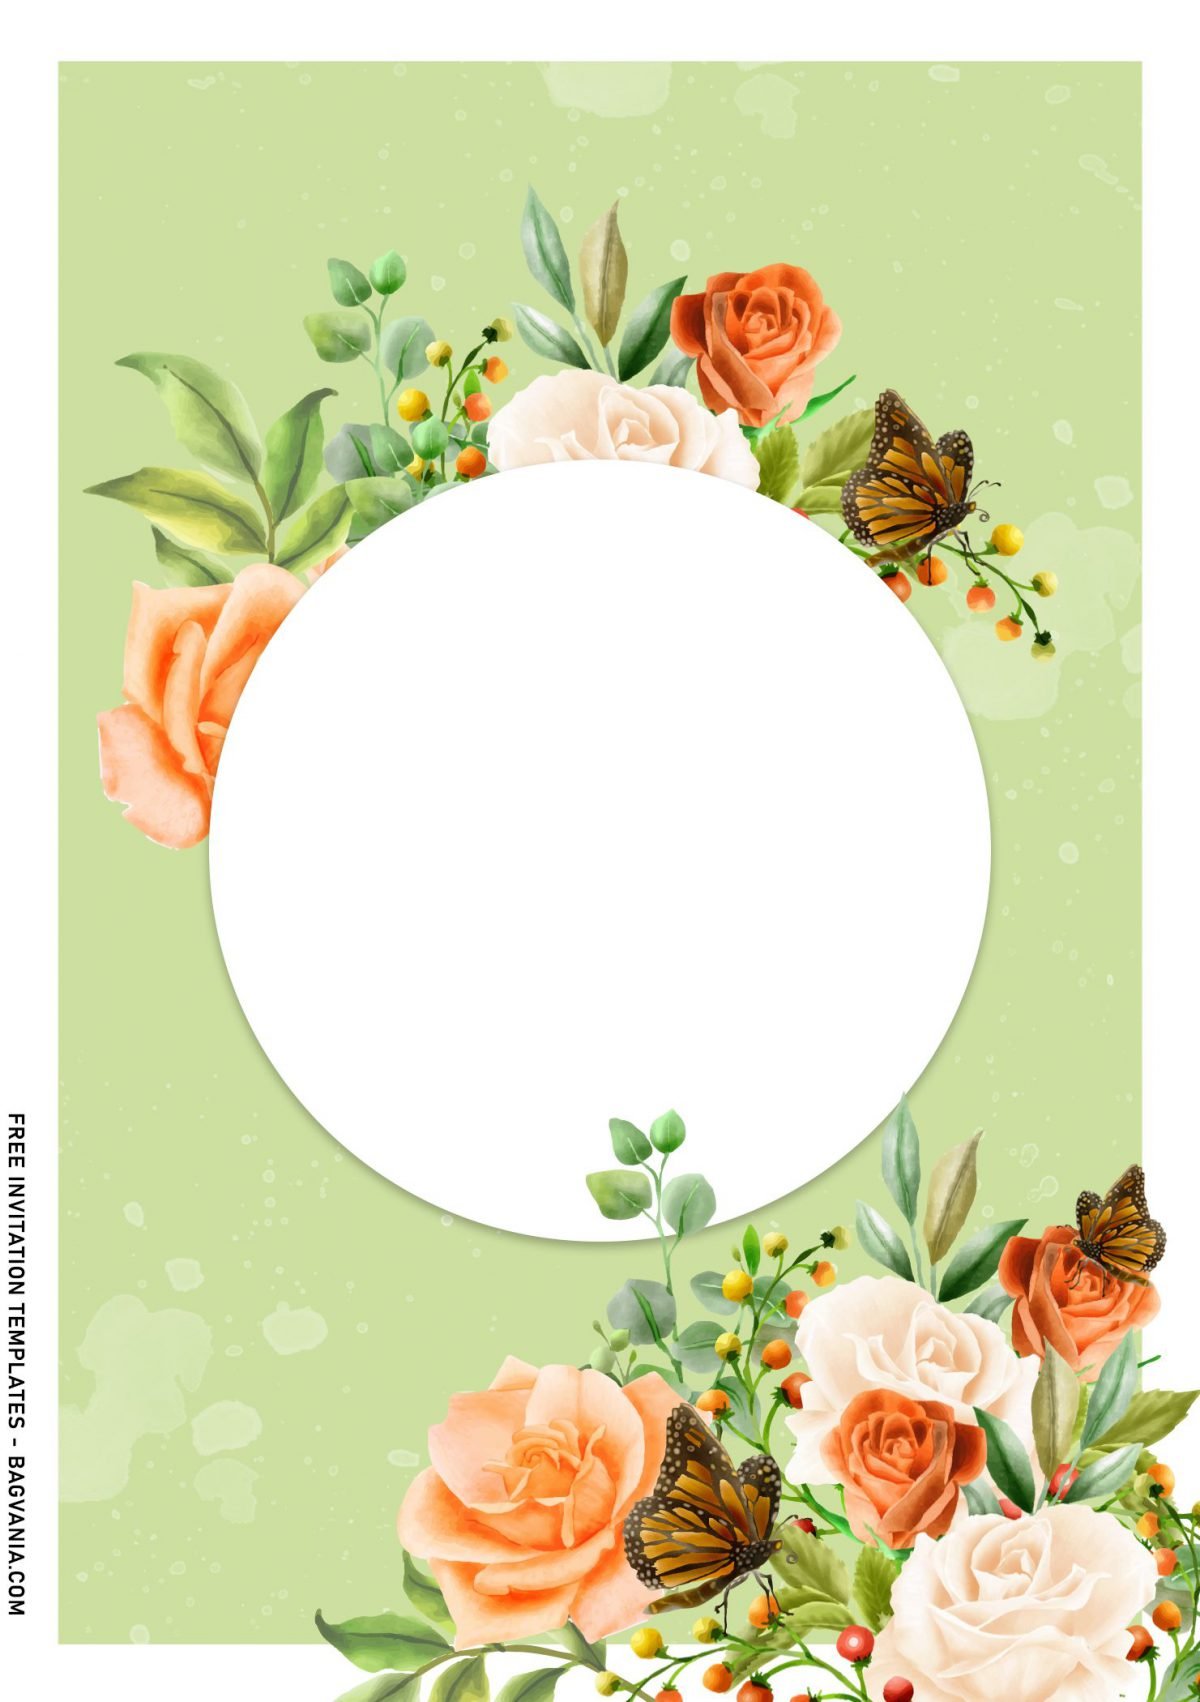 8+ Aesthetic Flower Birthday Invitation Templates With Birds And Butterflies with beautiful white rose